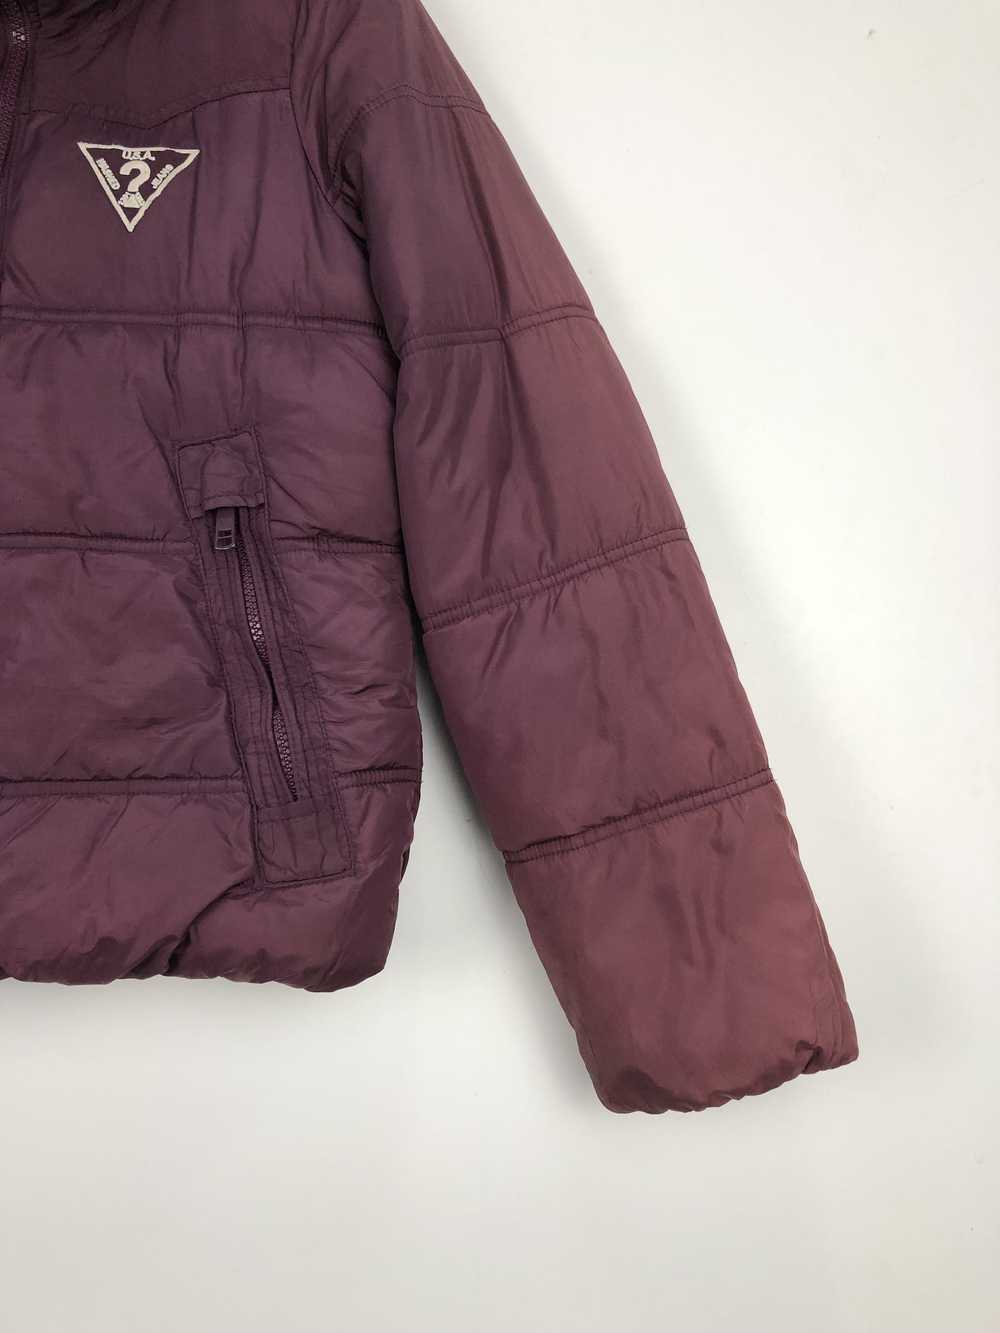 Guess × Vintage Vintage Guess Puffer Sherpa Hoode… - image 6